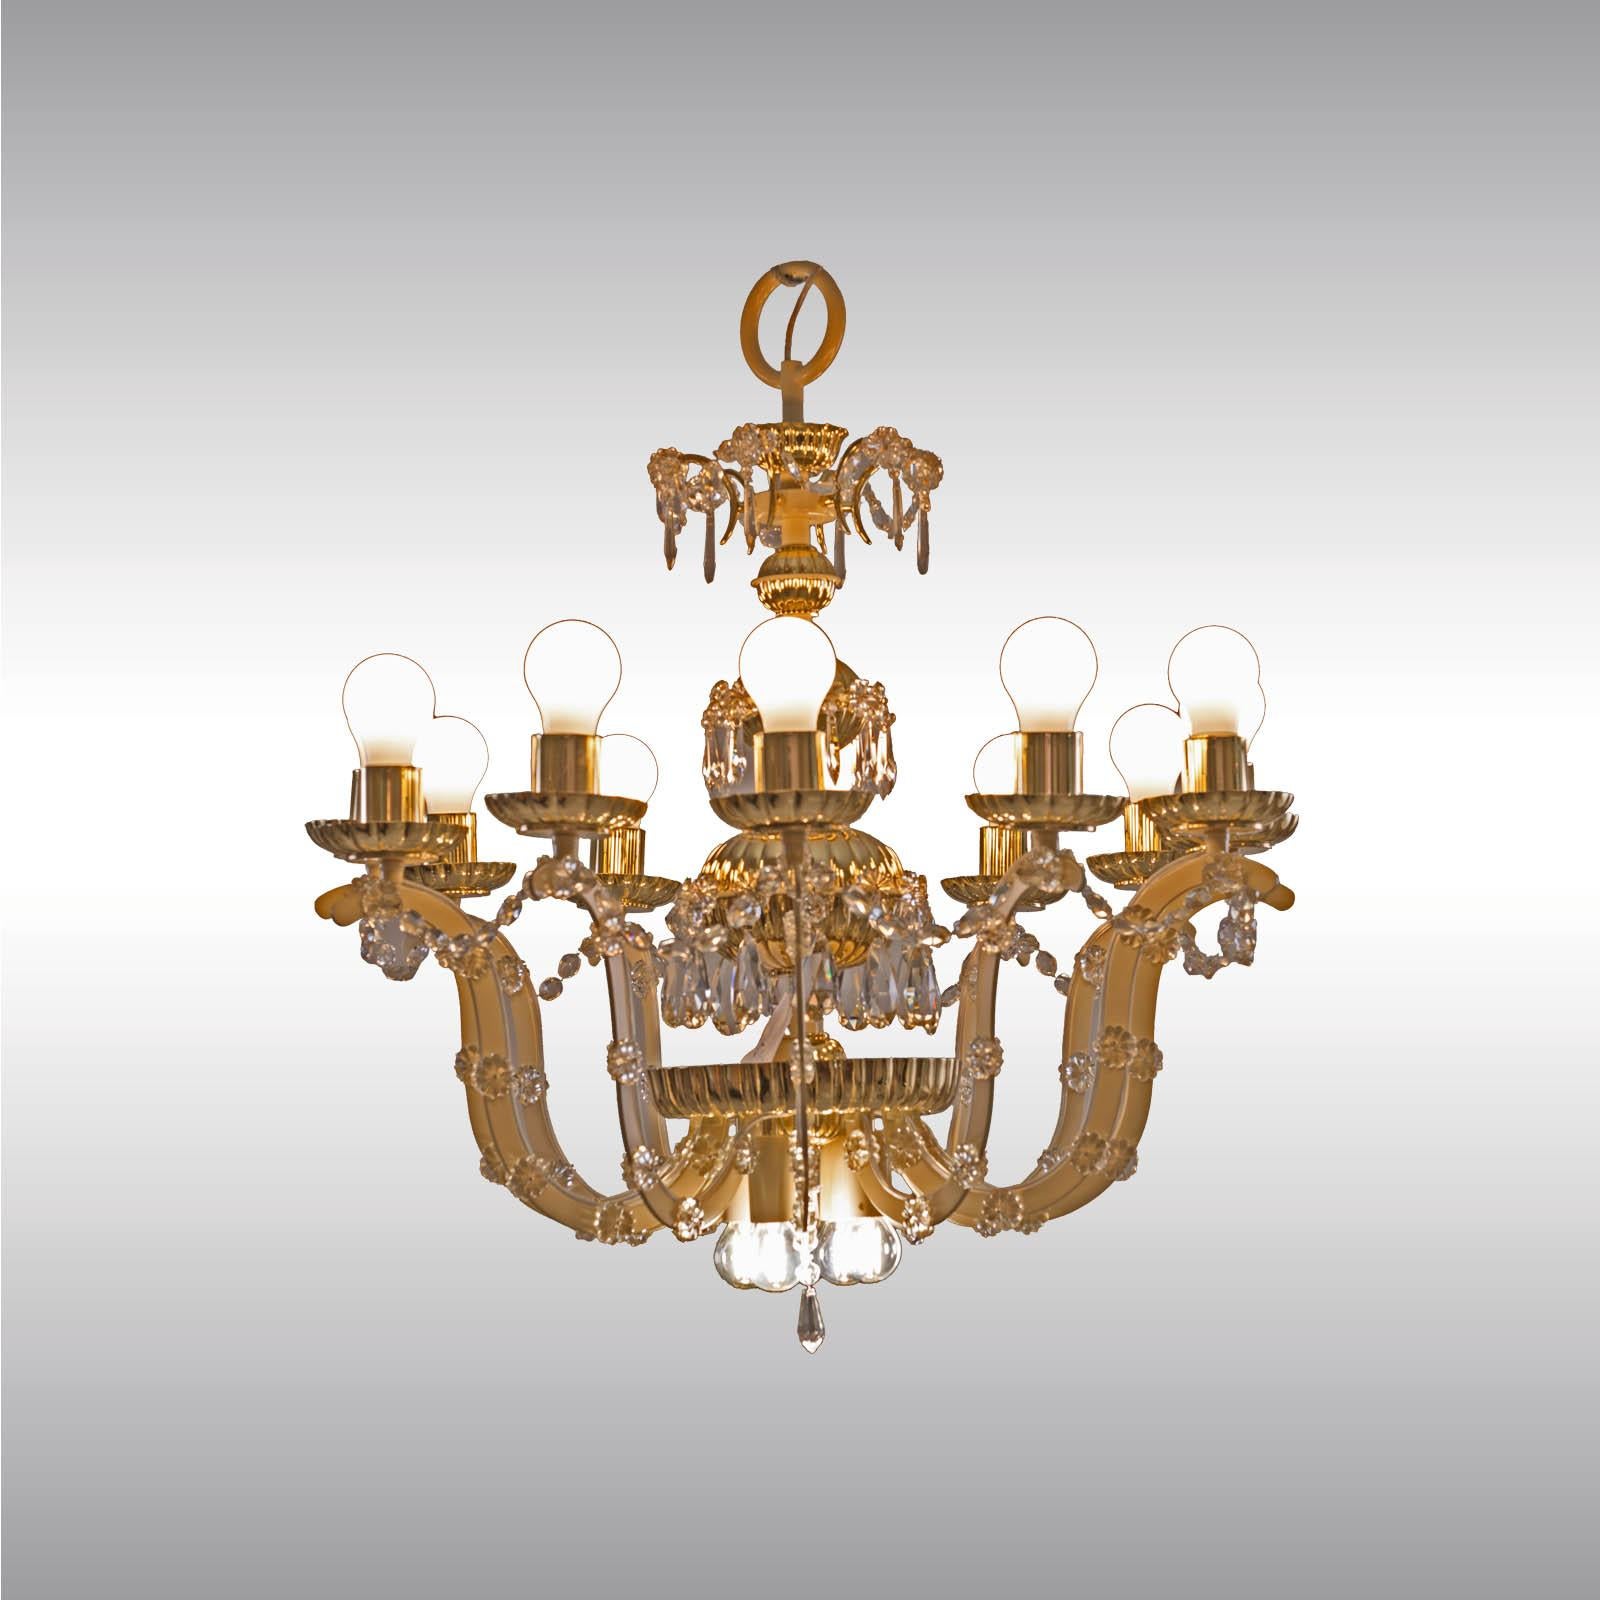 Magnificent chandelier from circa 1960, Mid-Century Modern, chased parts in brass and glass-application.
       